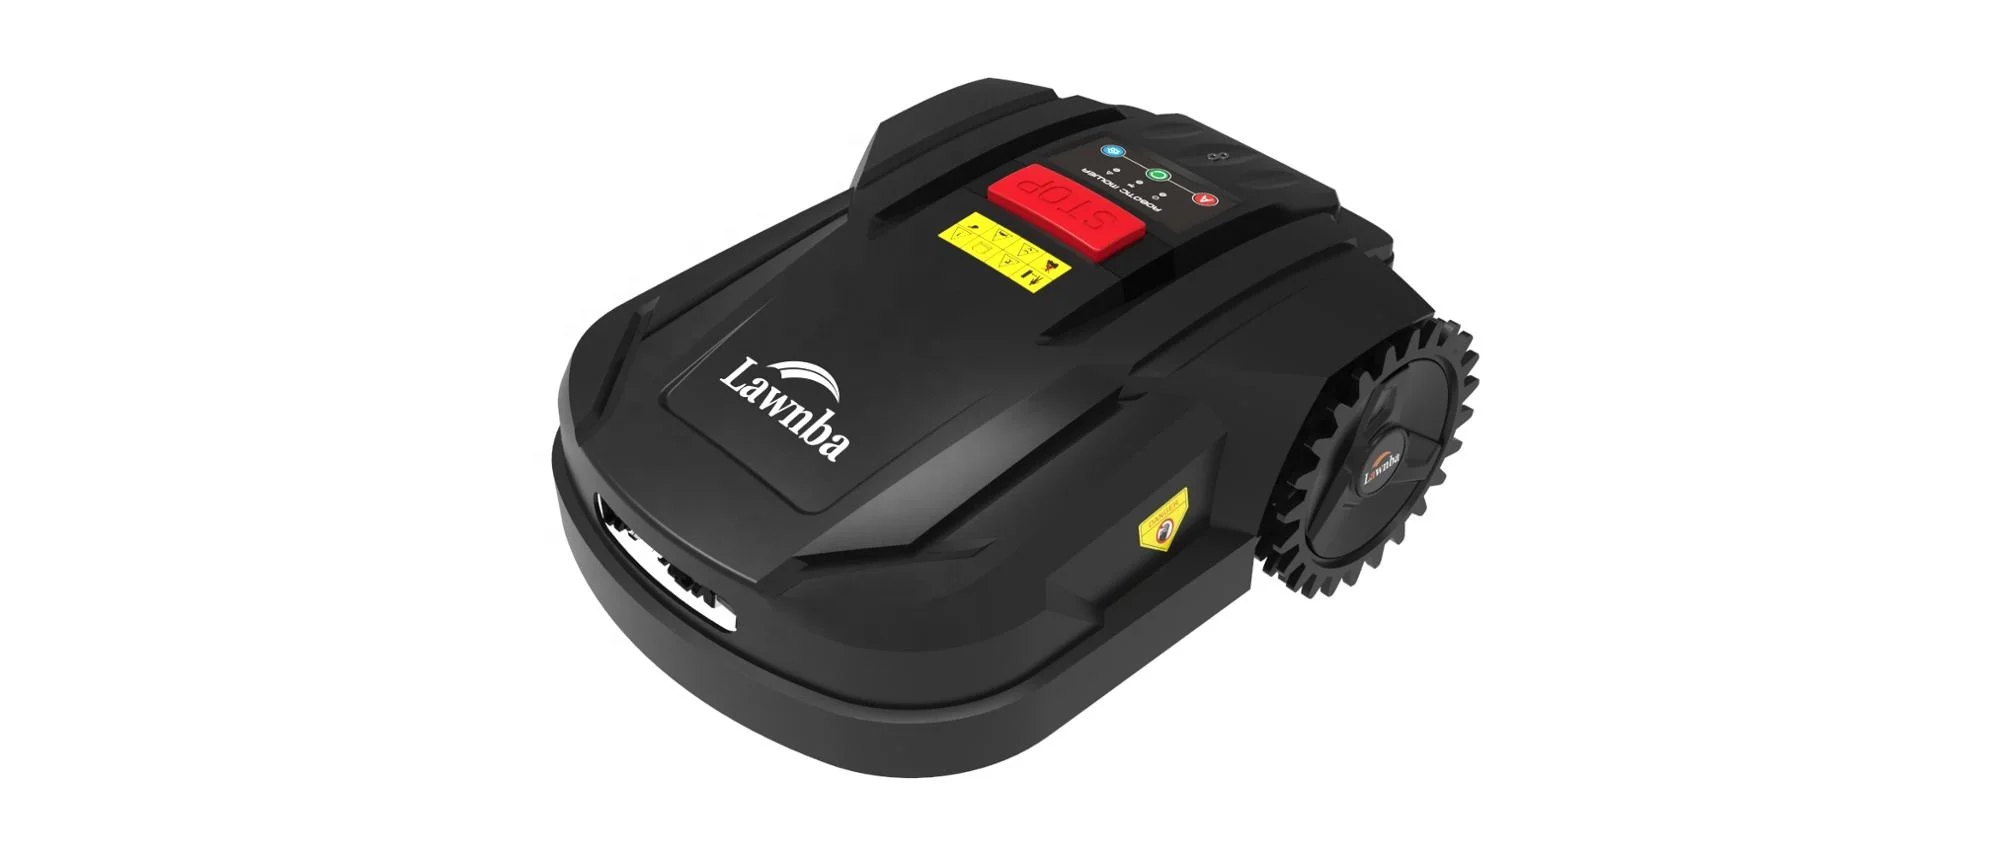 

Battery Powered Grass Mower with Subarea Setting Economical Auto Mower H750 Robot Lawn Mower